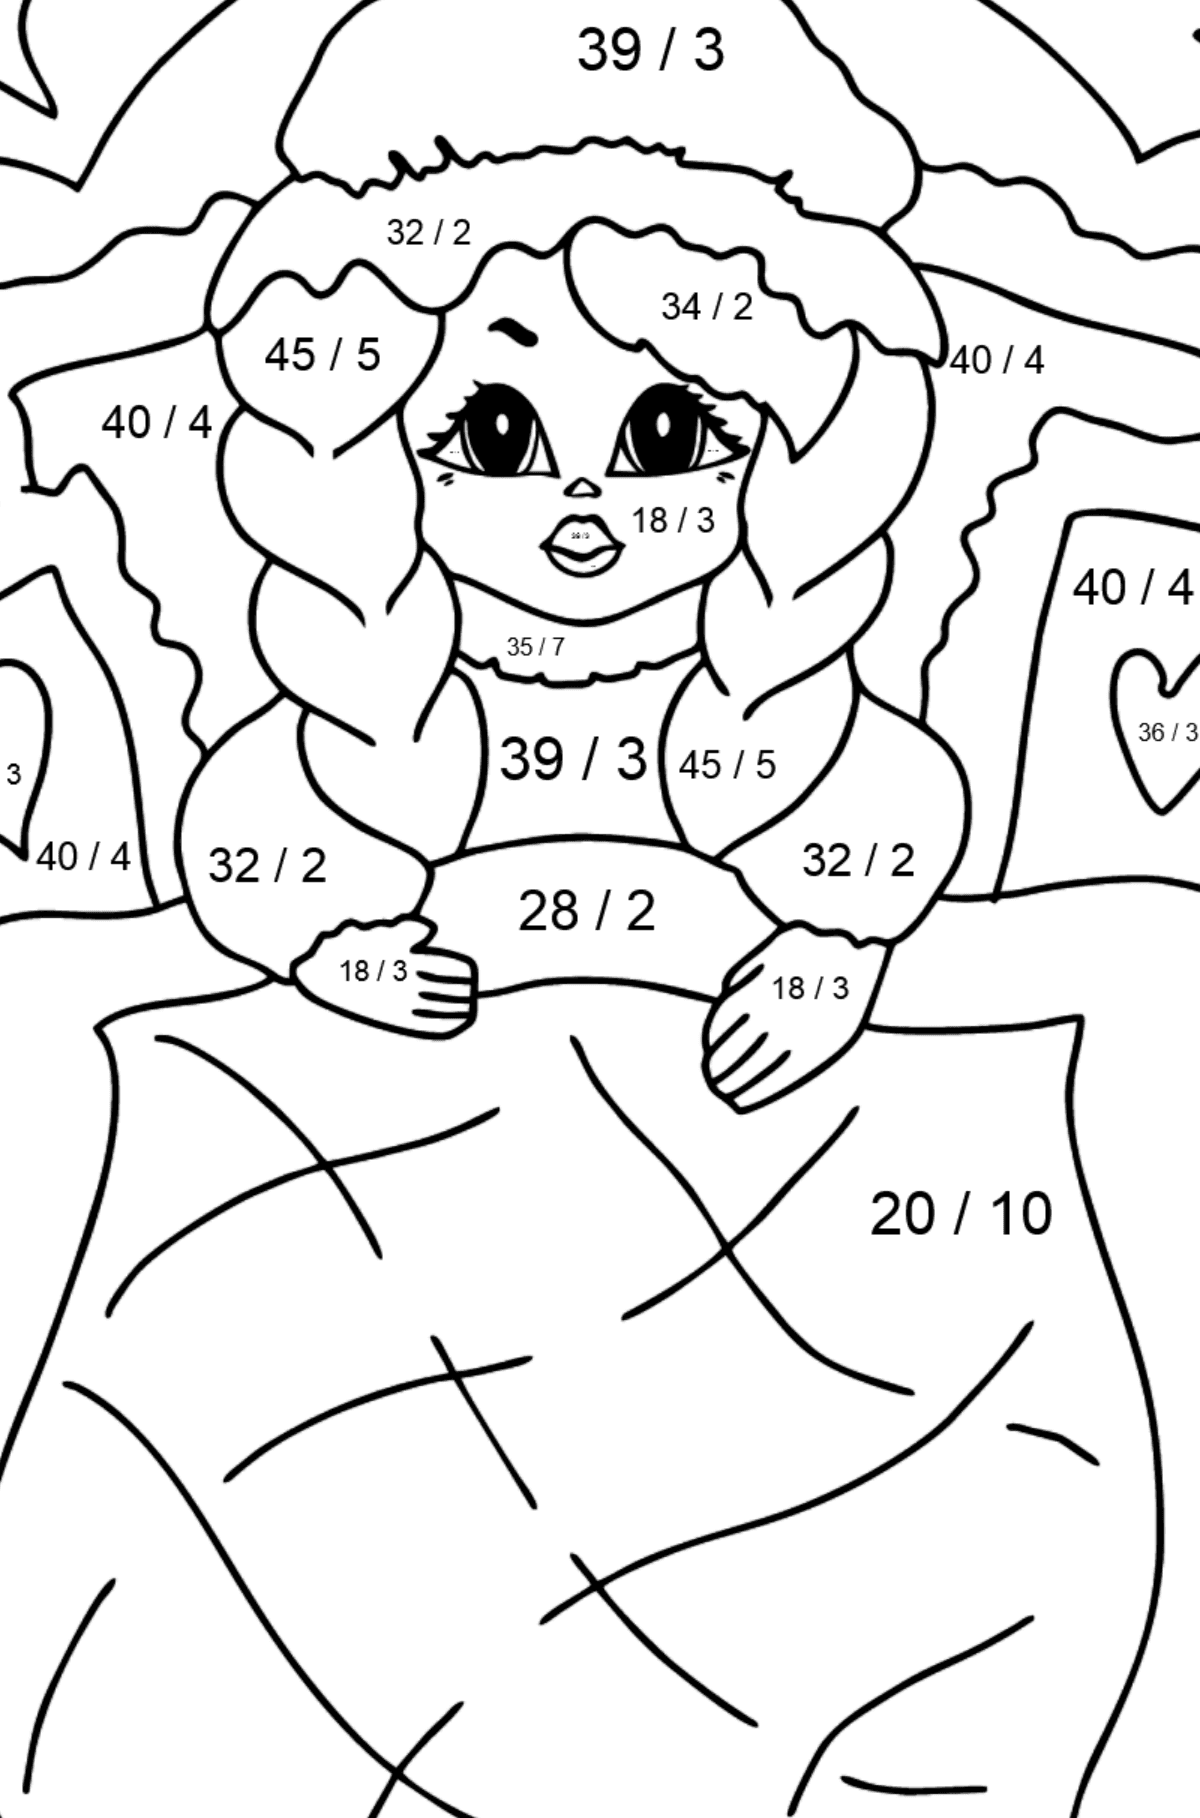 Coloring Page - A Princess in Bed - Math Coloring - Division for Kids